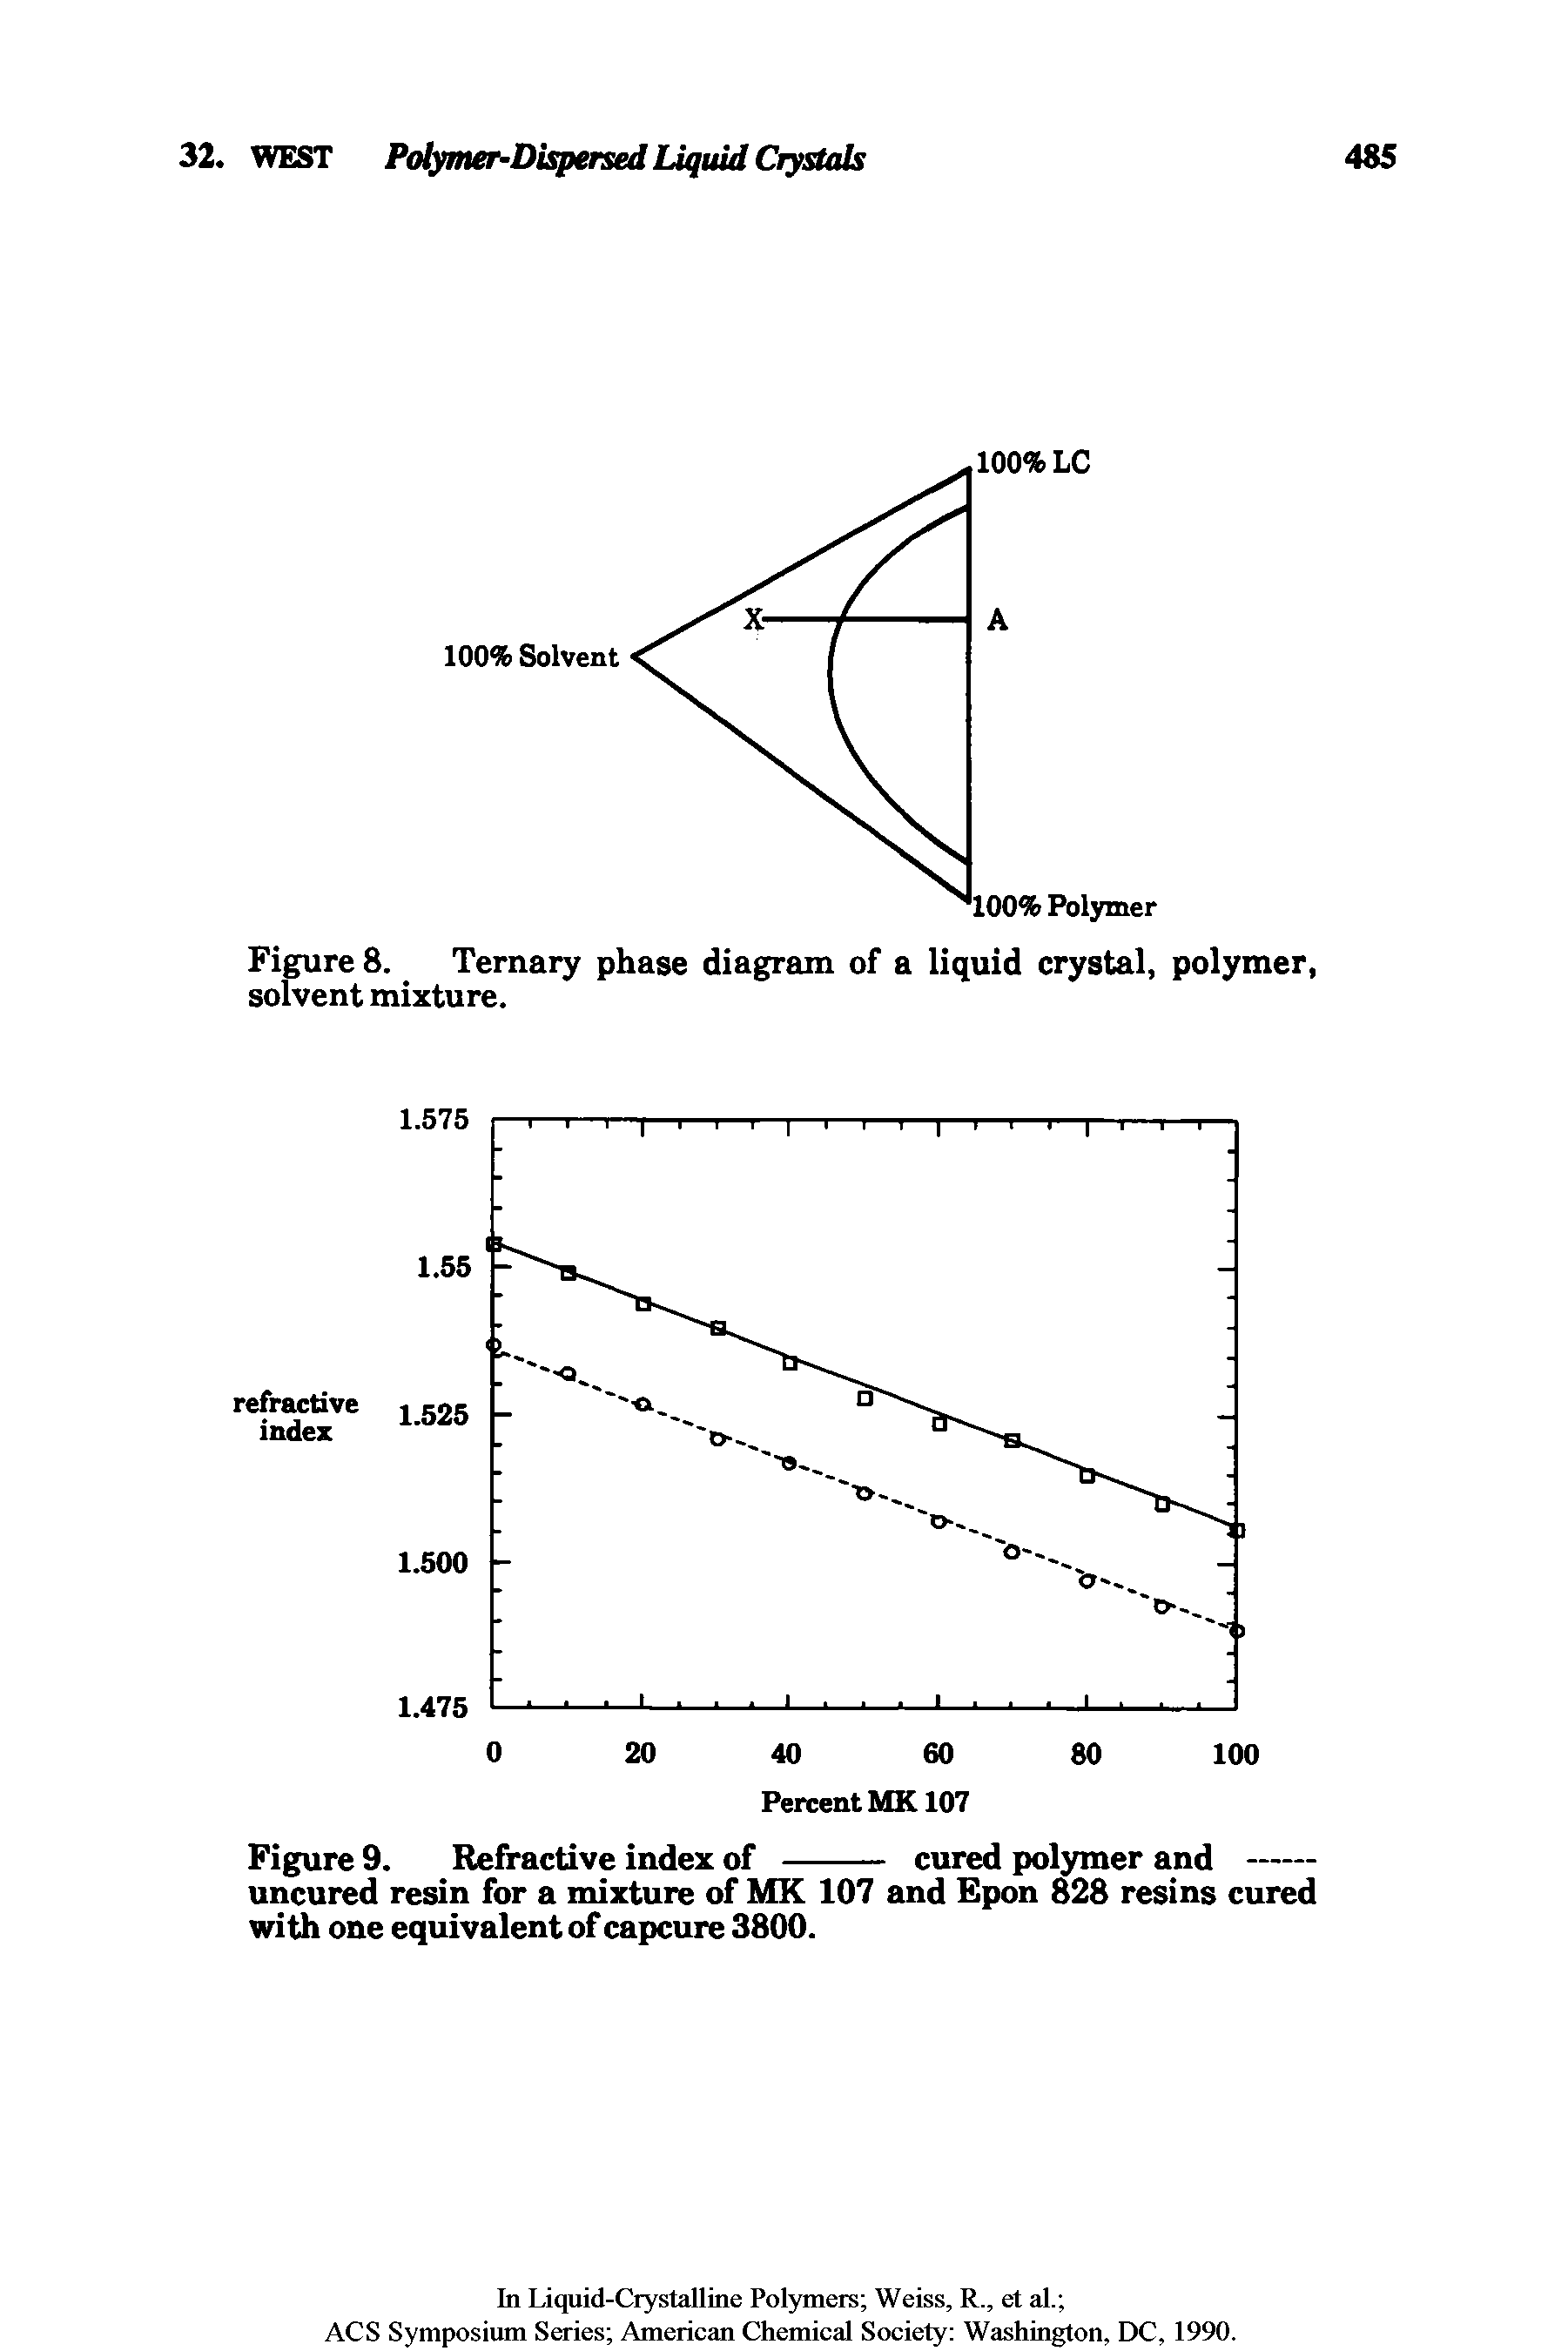 Figure 8. Ternary phase diagram of a liquid crystal, polymer, solvent mixture.